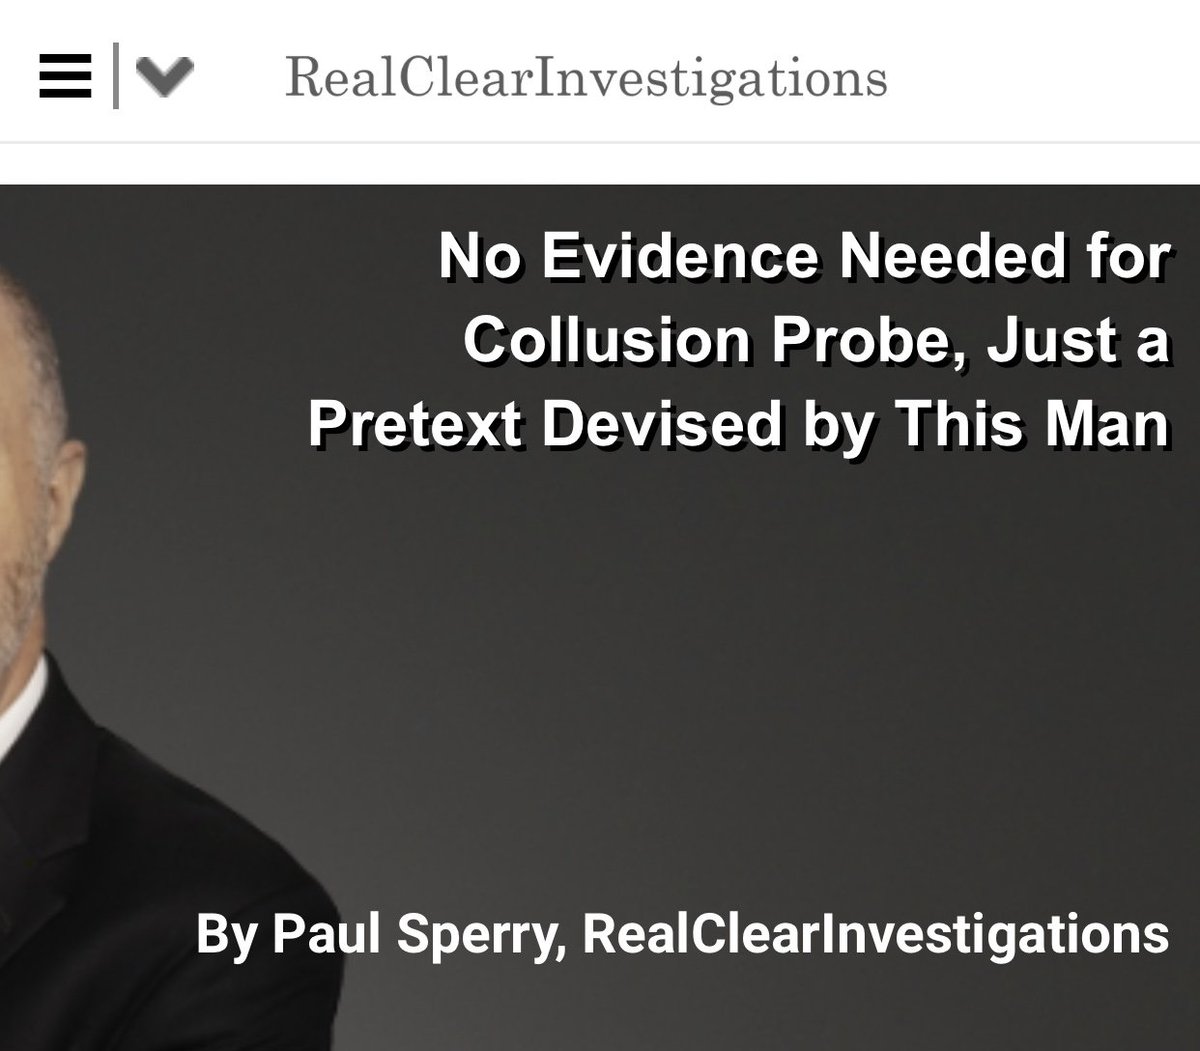  https://www.realclearinvestigations.com/articles/2020/06/23/no_evidence_needed_for_collusion_probe_just_an_obscure_pretext_spearheaded_by_this_man_124020.html